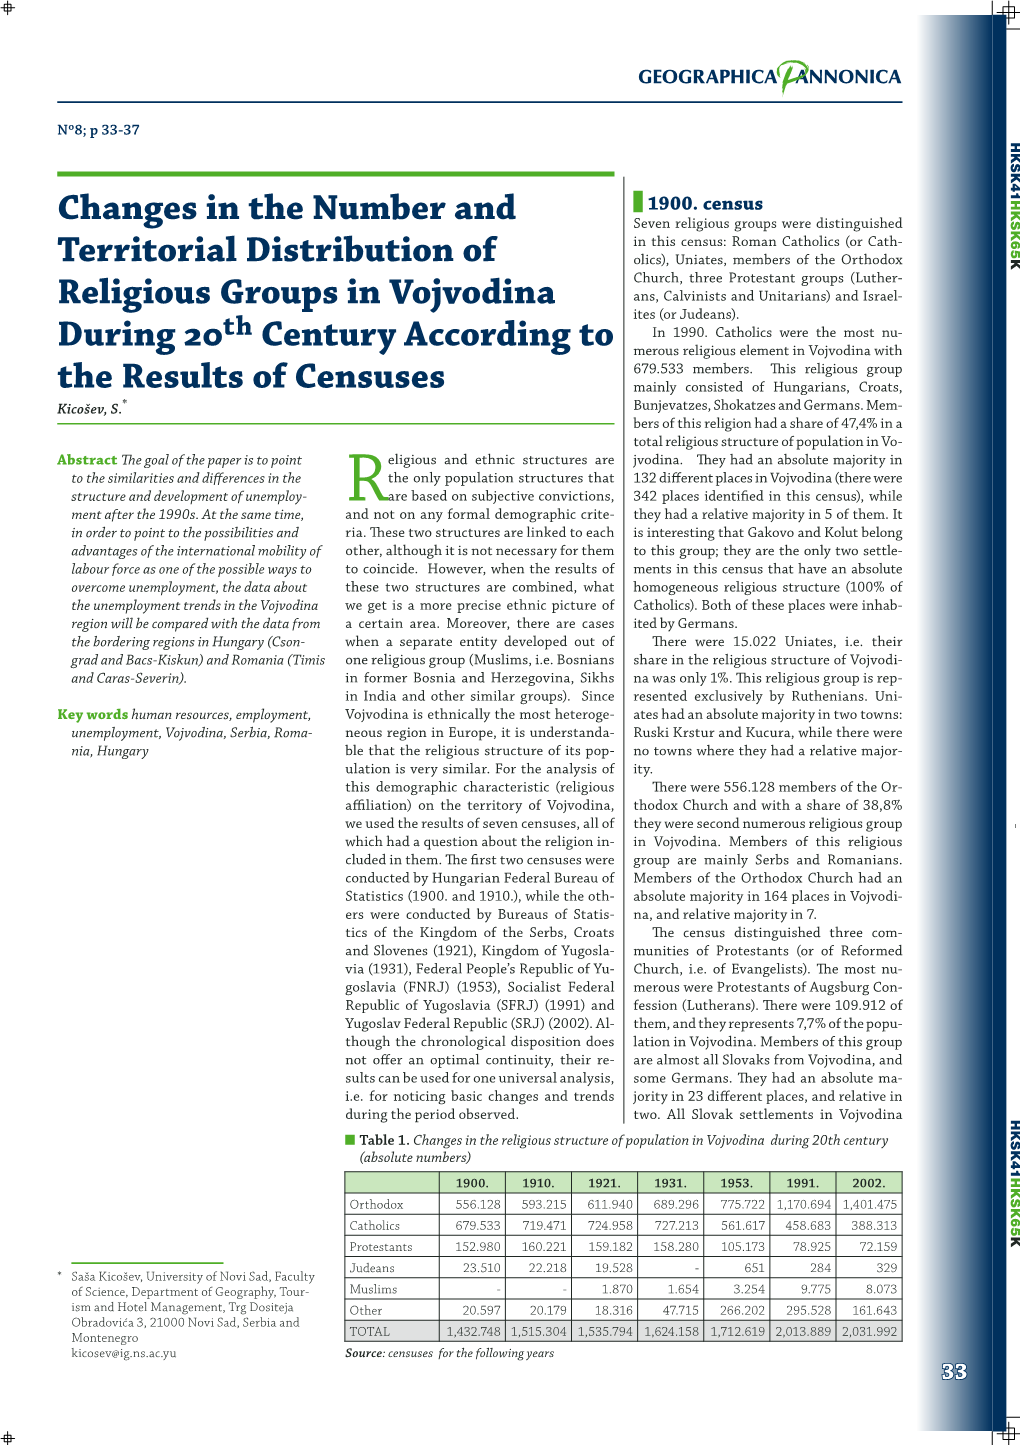 Changes in the Number and Territorial Distribution of Religious Groups In